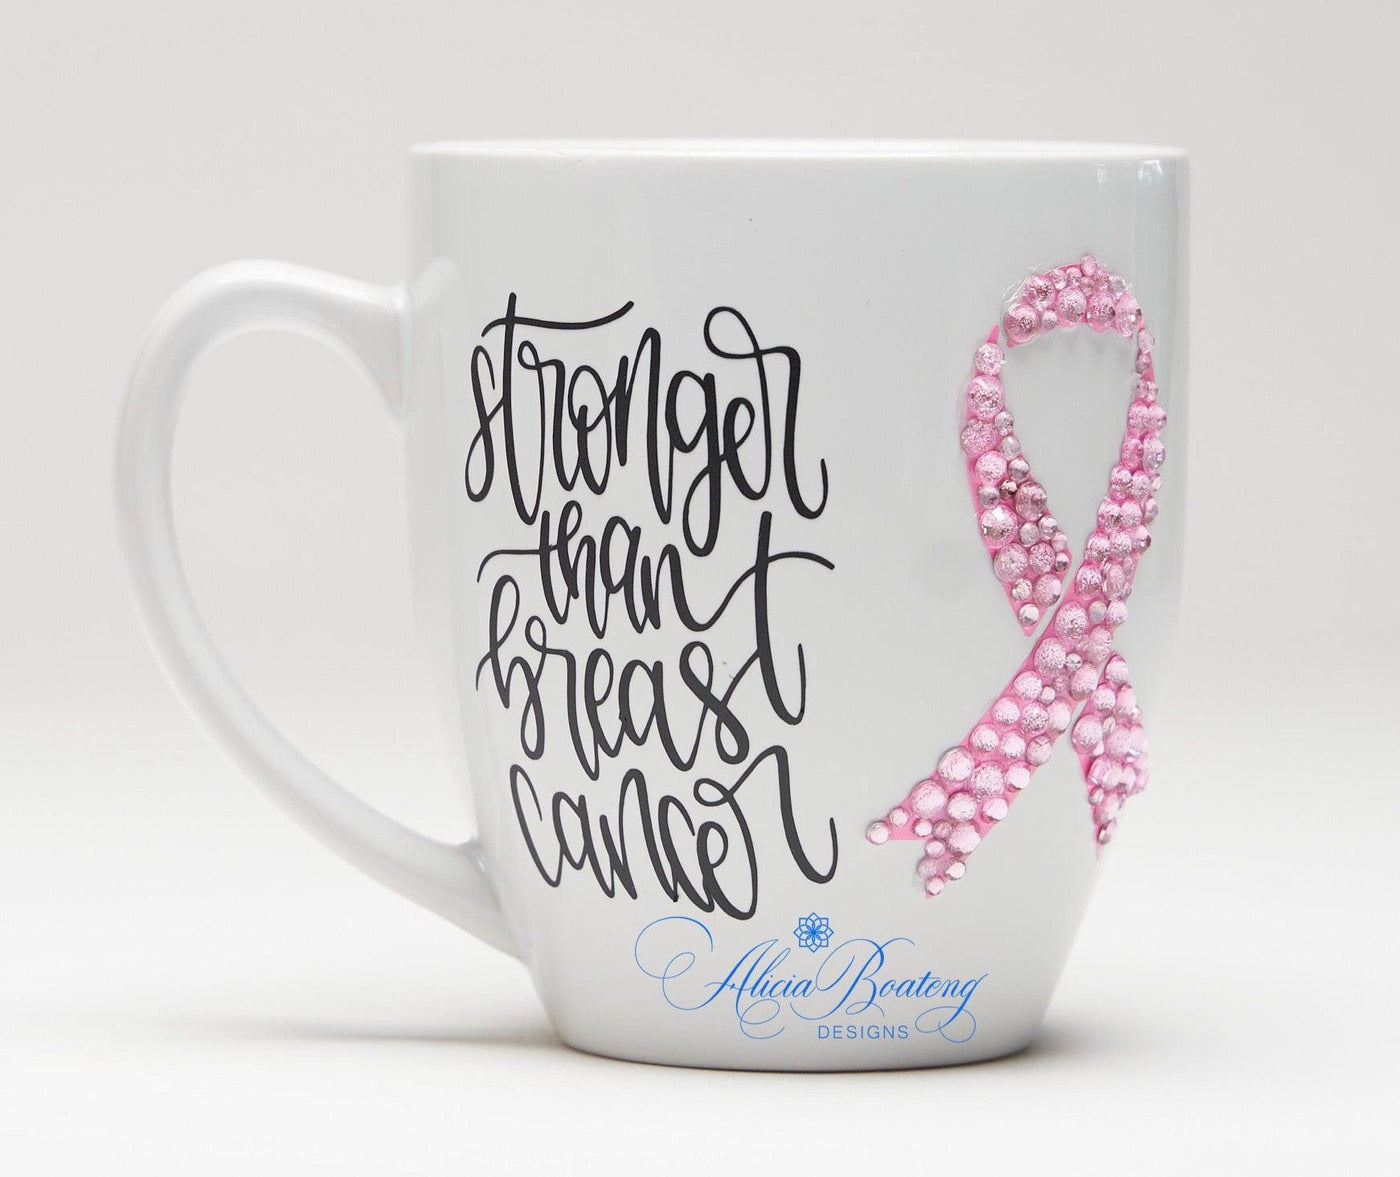 Stronger than Cancer Breast Cancer Coffee / Tea cup, Bling Coffee Cup,